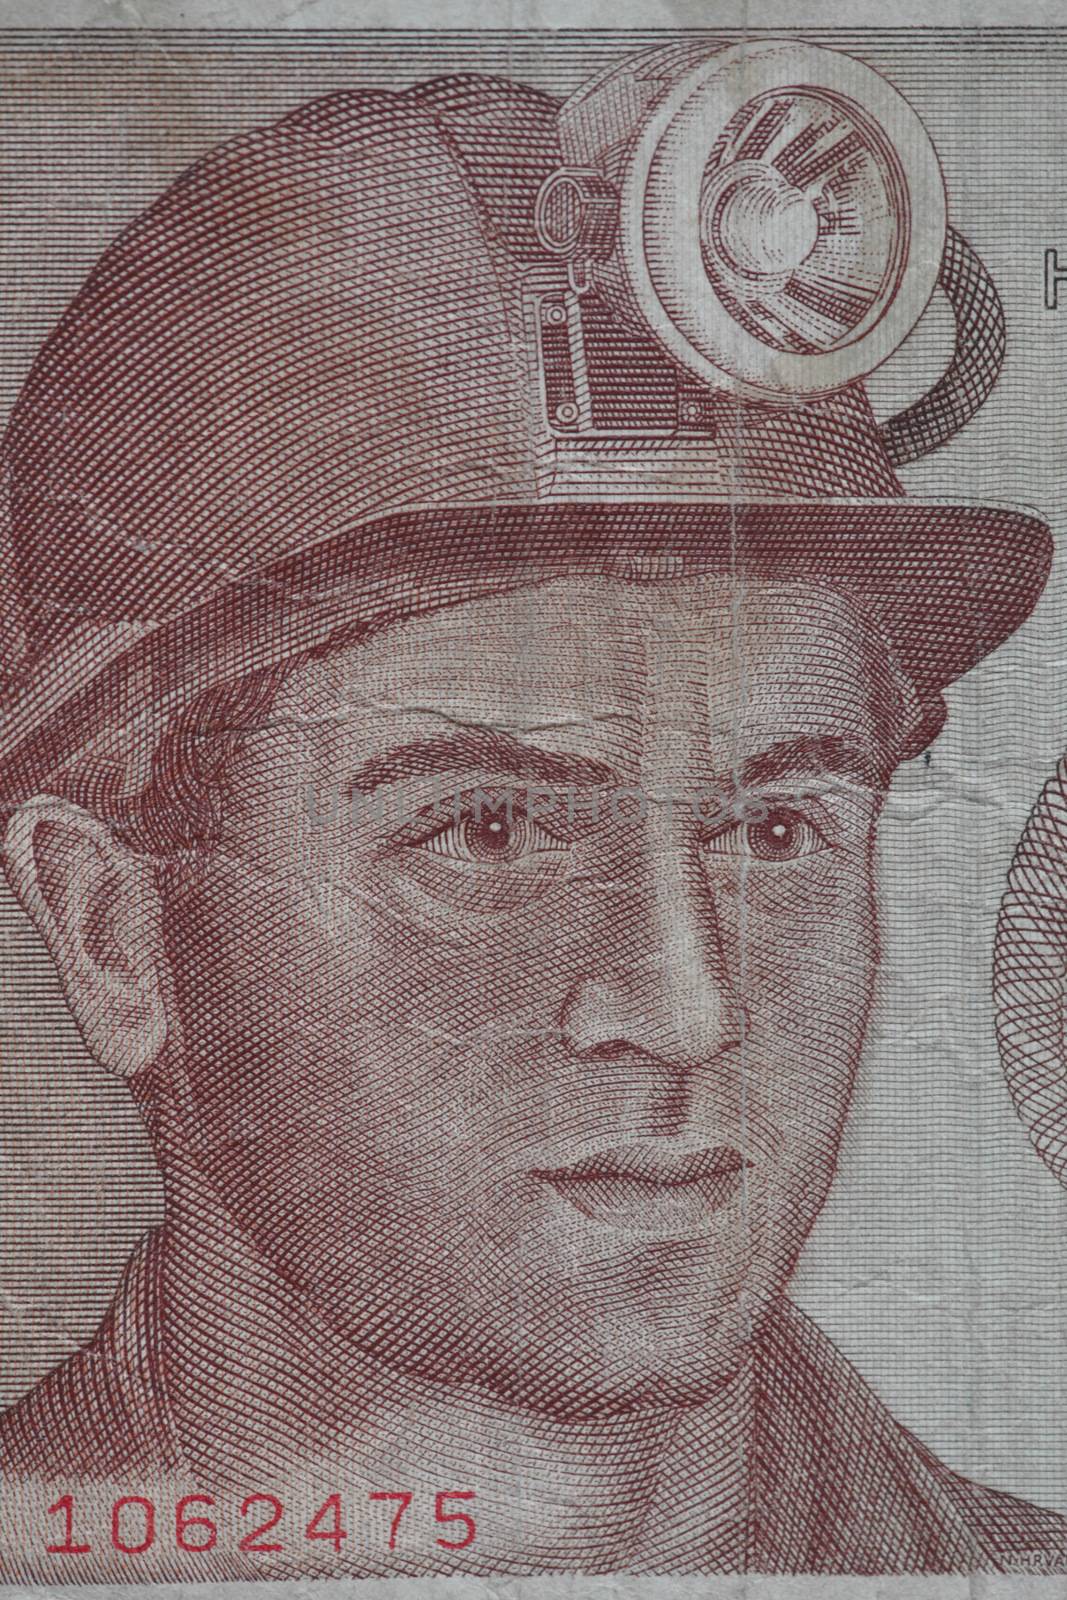 Miner in a helmet with a lantern portrait on a banknote